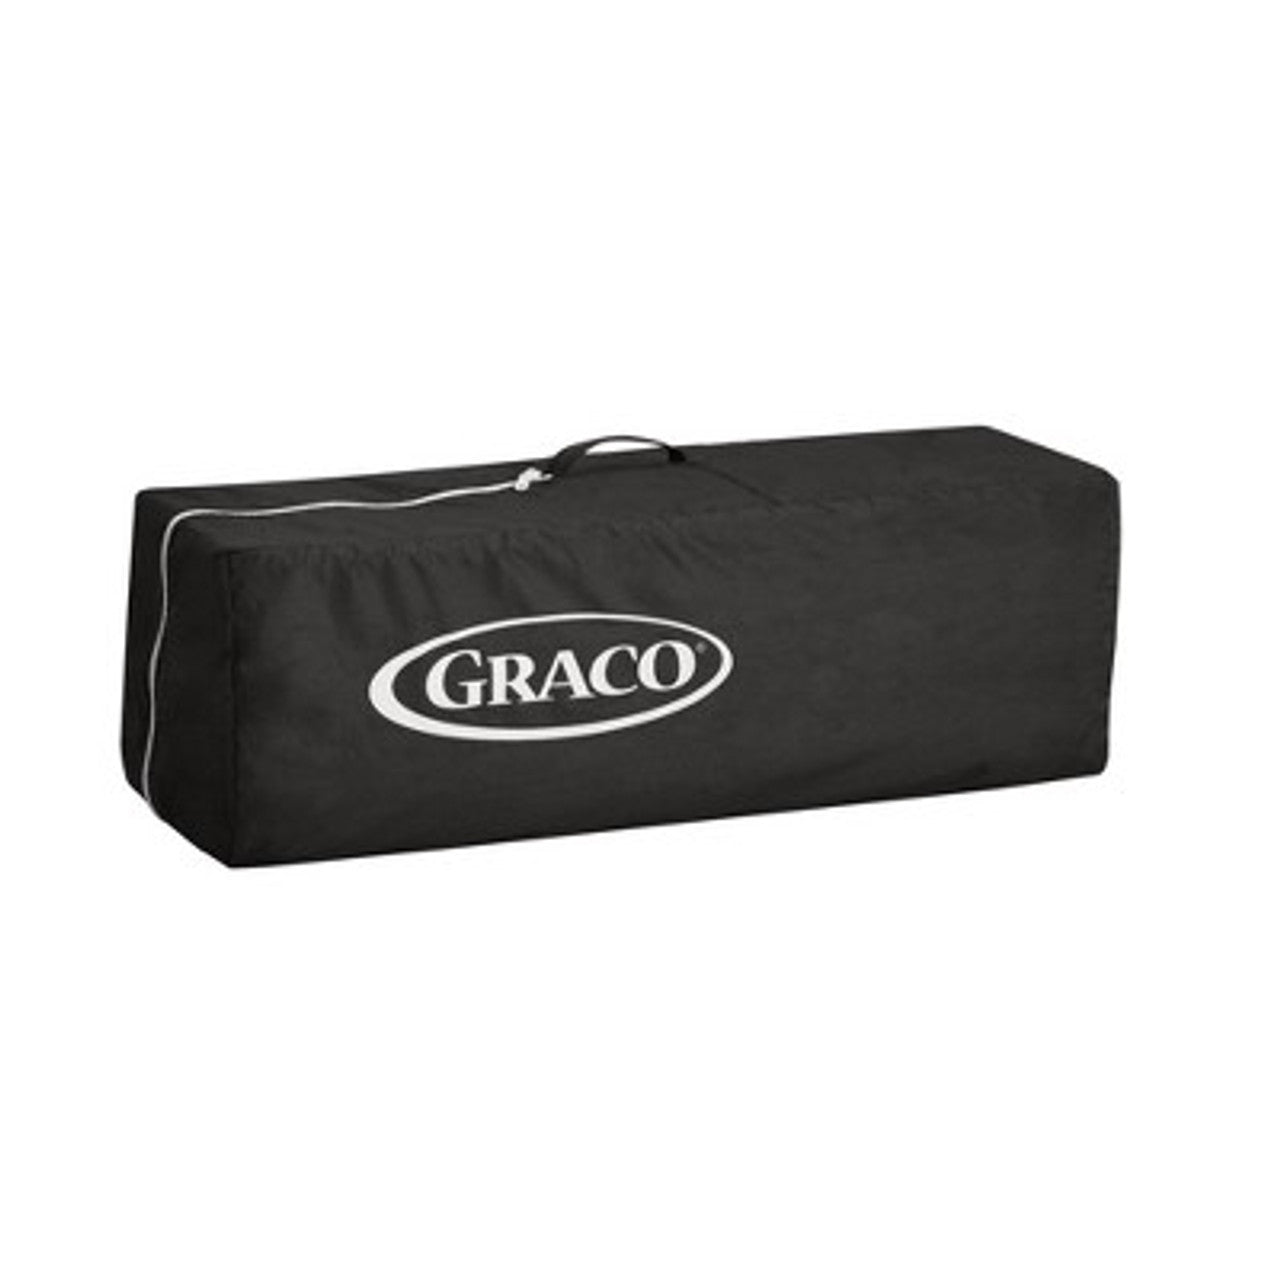 New - Graco Pack 'n Play Portable Playard - Marty